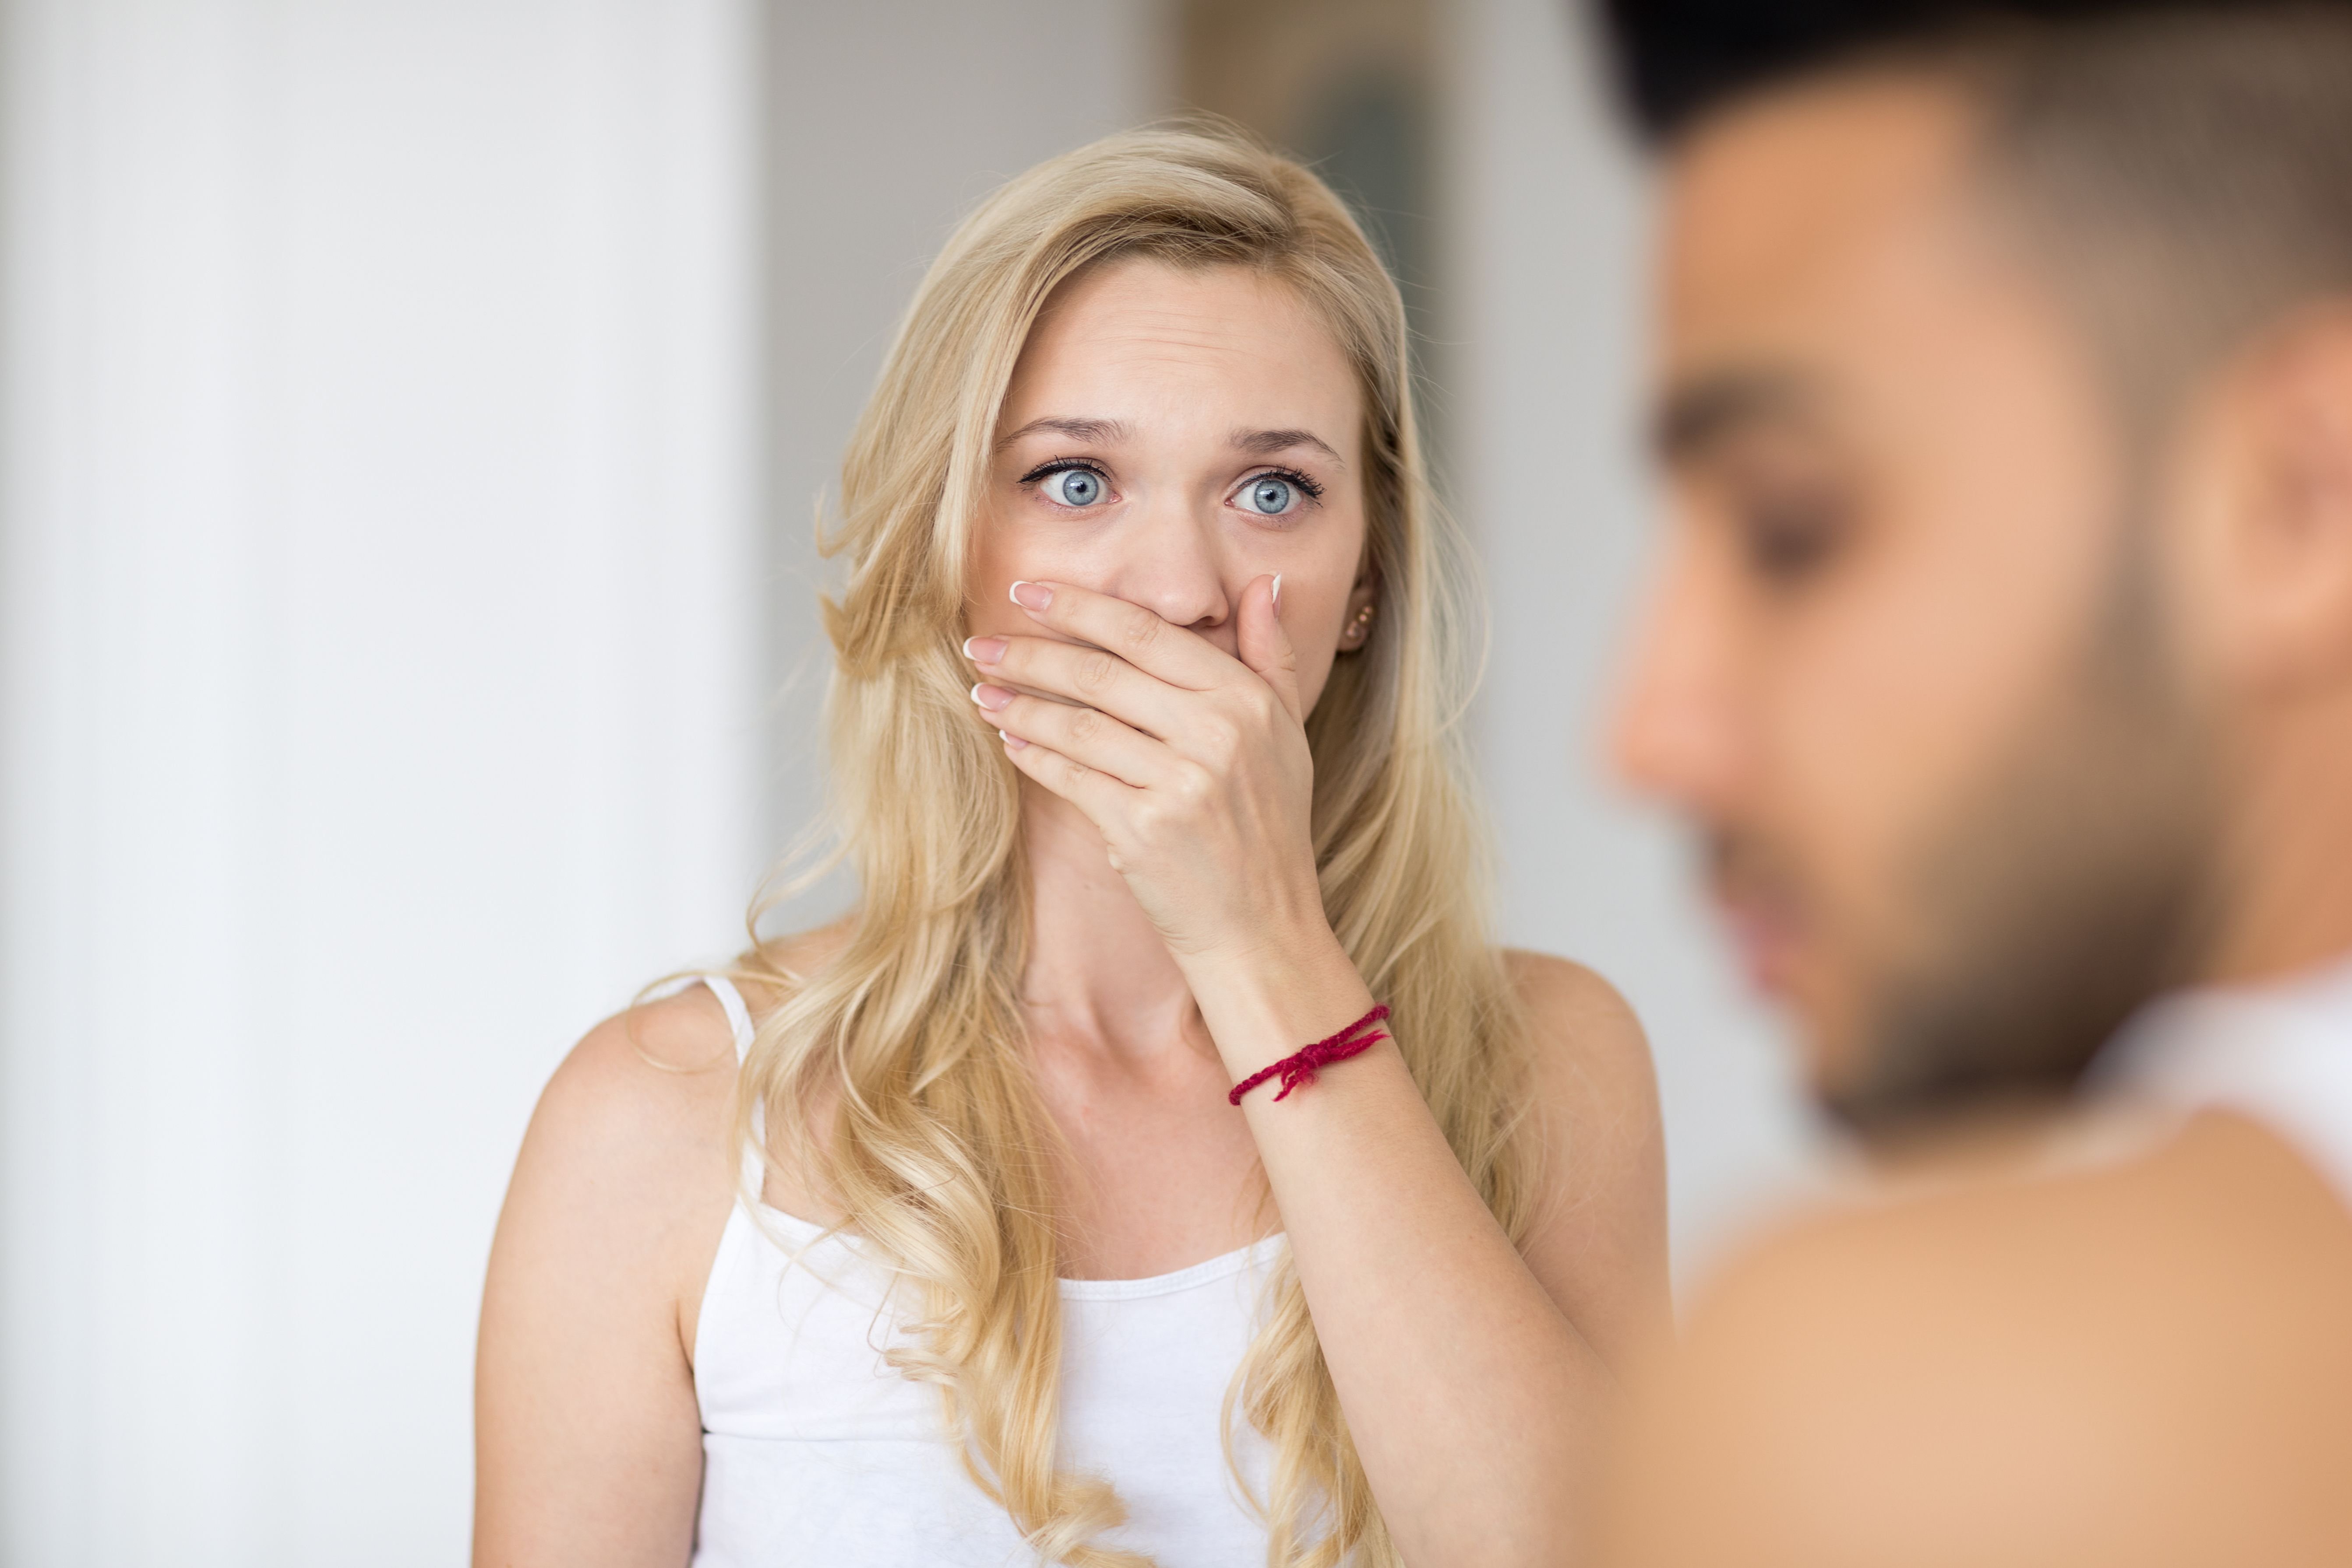 A woman looks shocked while standing in front of a man. | Source: Shutterstock